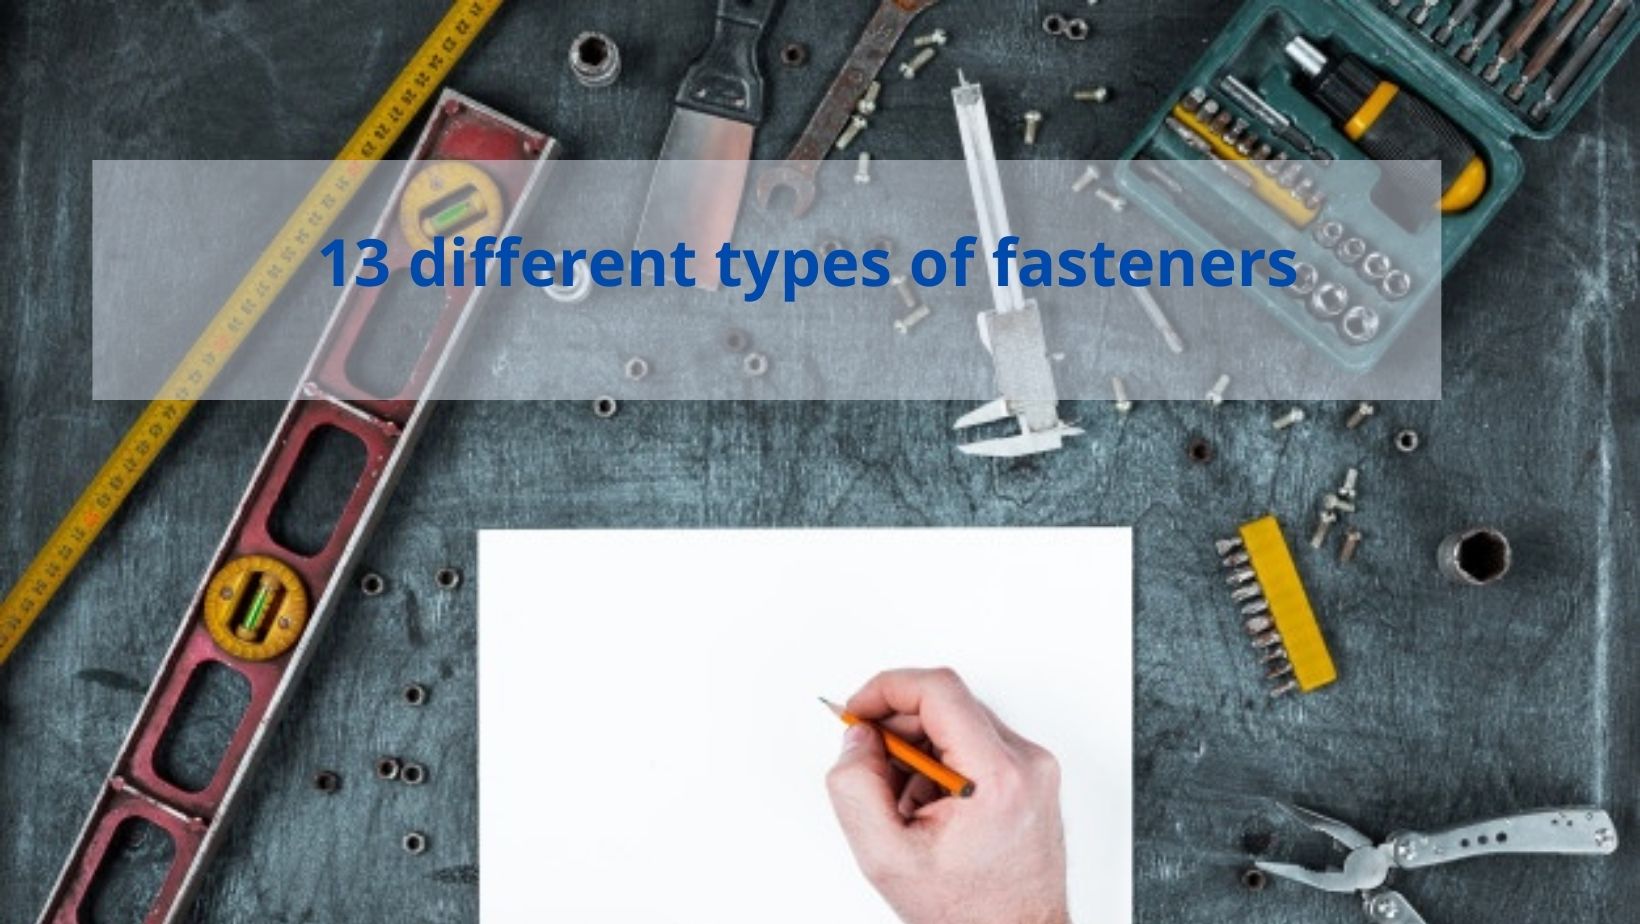 13 different types of fasteners